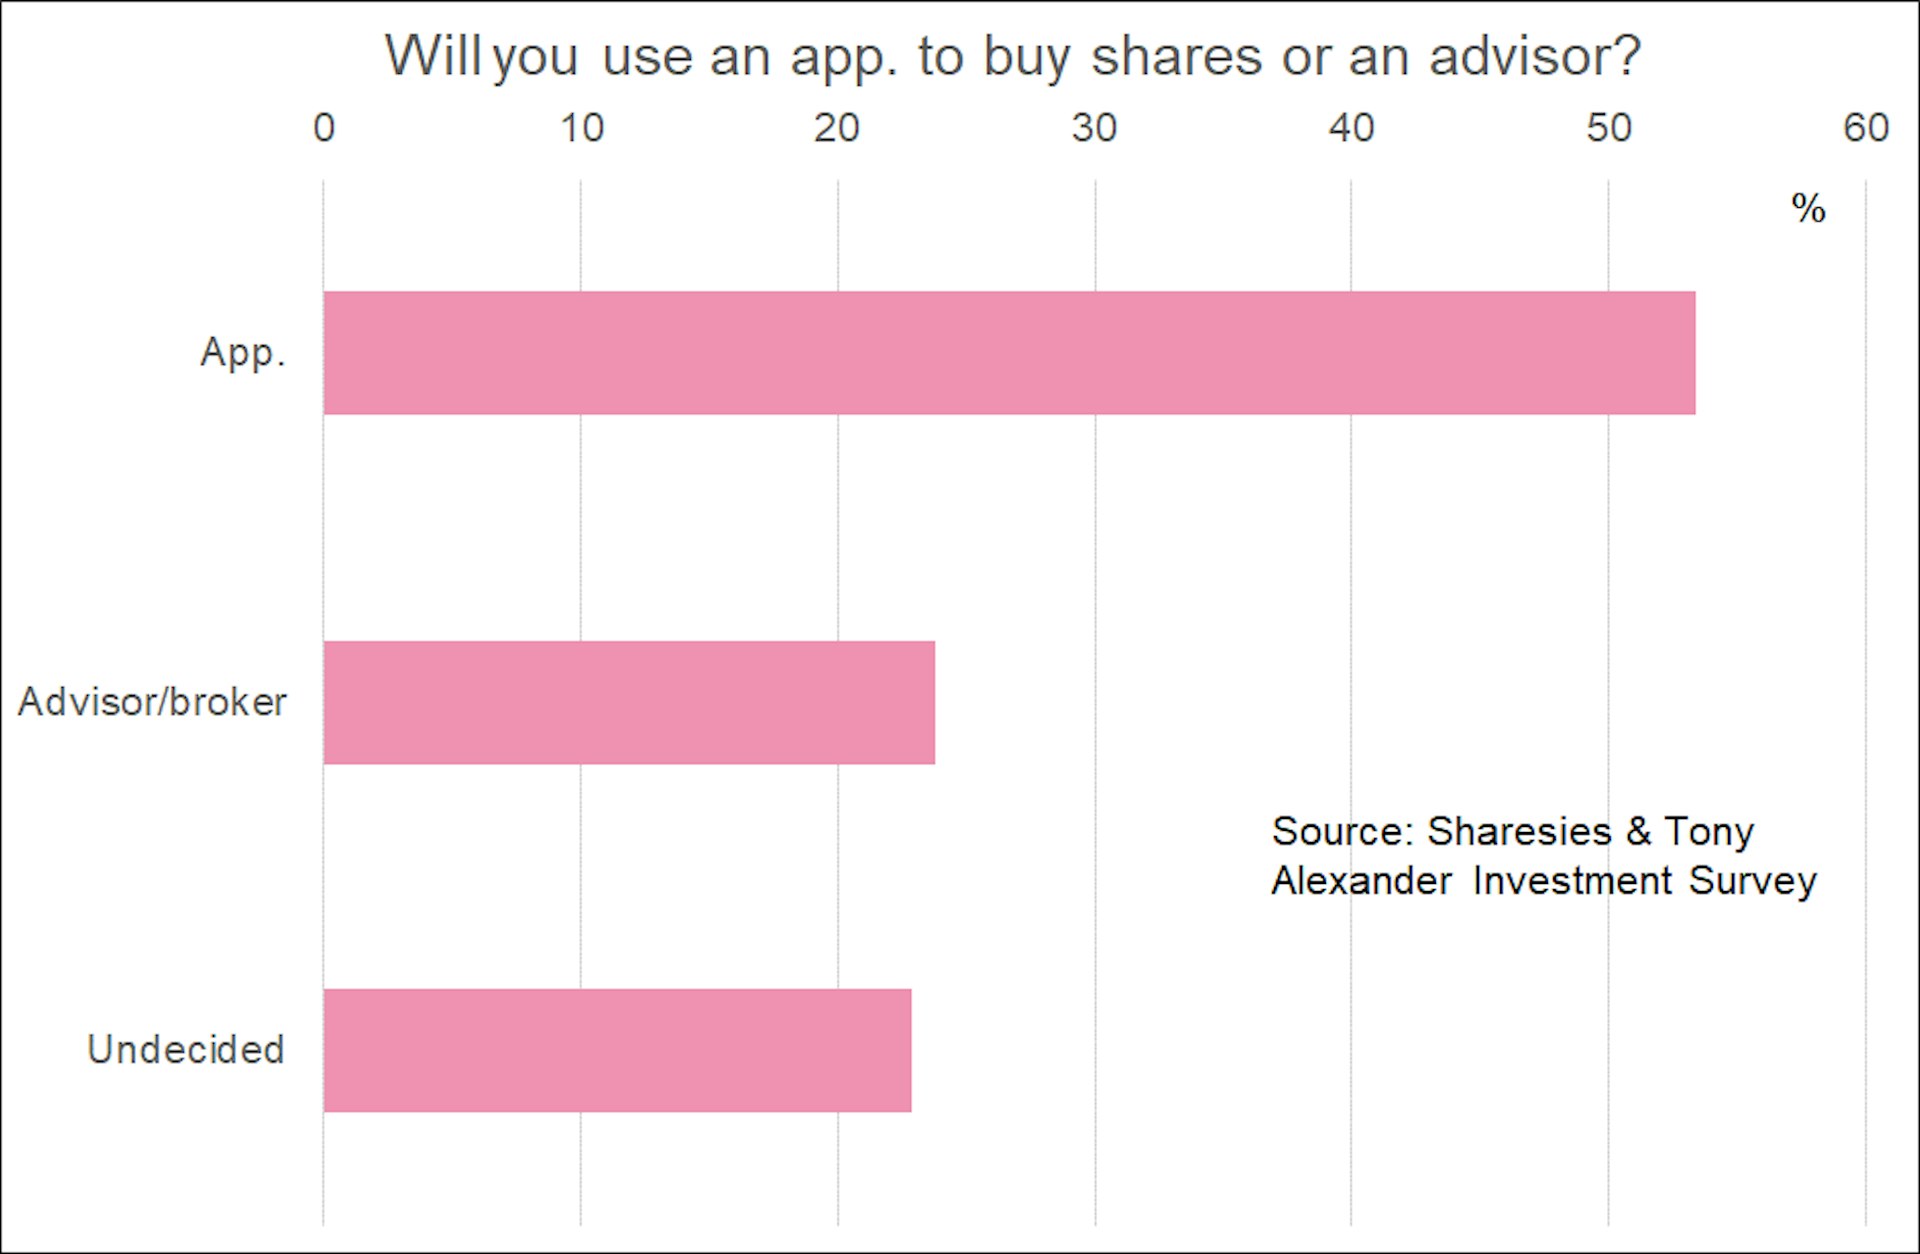 Bar graph showing that 53% of investors would buy shares through an app vs 24% who would use a broker.